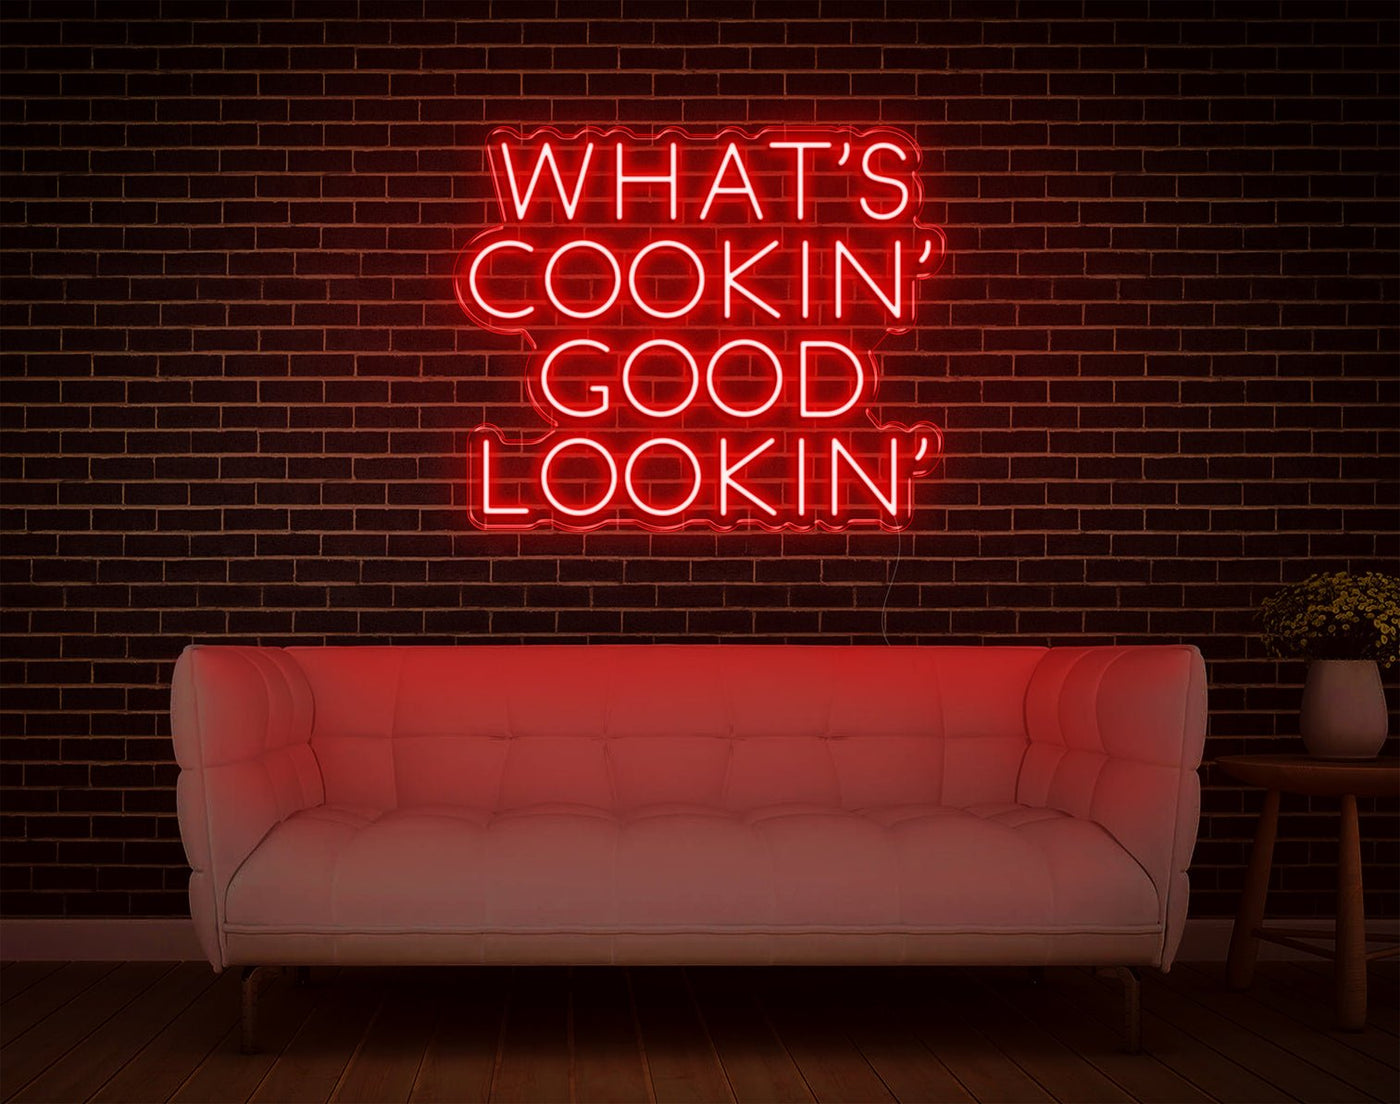 What's Cookin' Good Lookin' LED Neon Sign - 21inch x 25inchRed